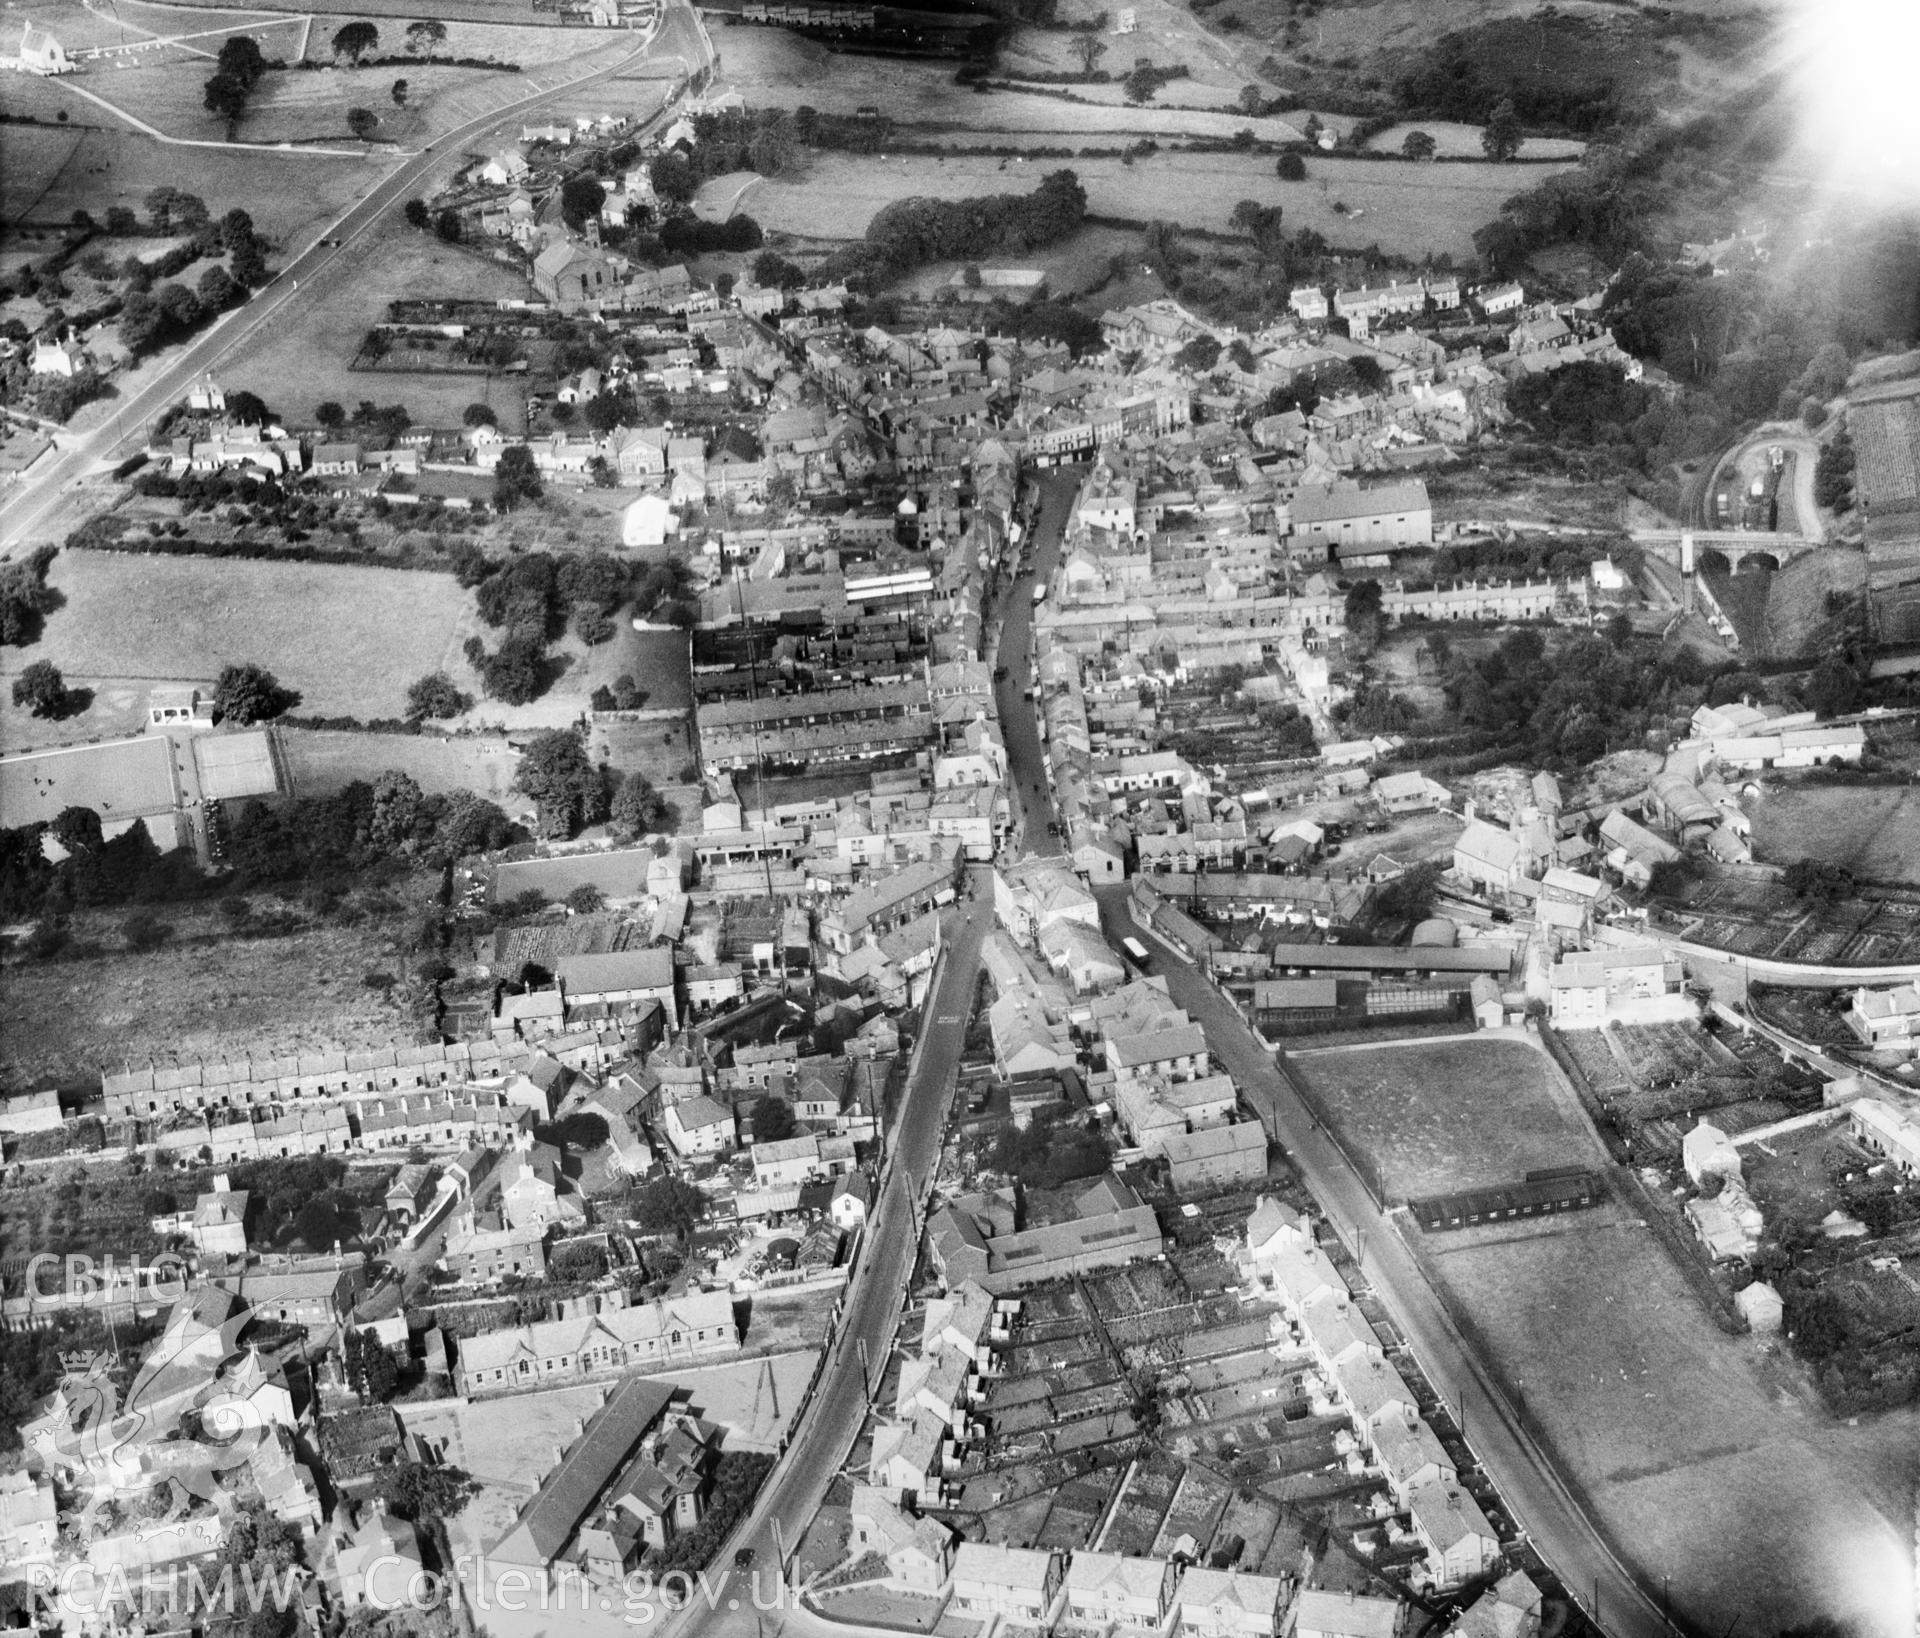 View of Holywell, oblique aerial view. 5?x4? black and white glass plate negative.